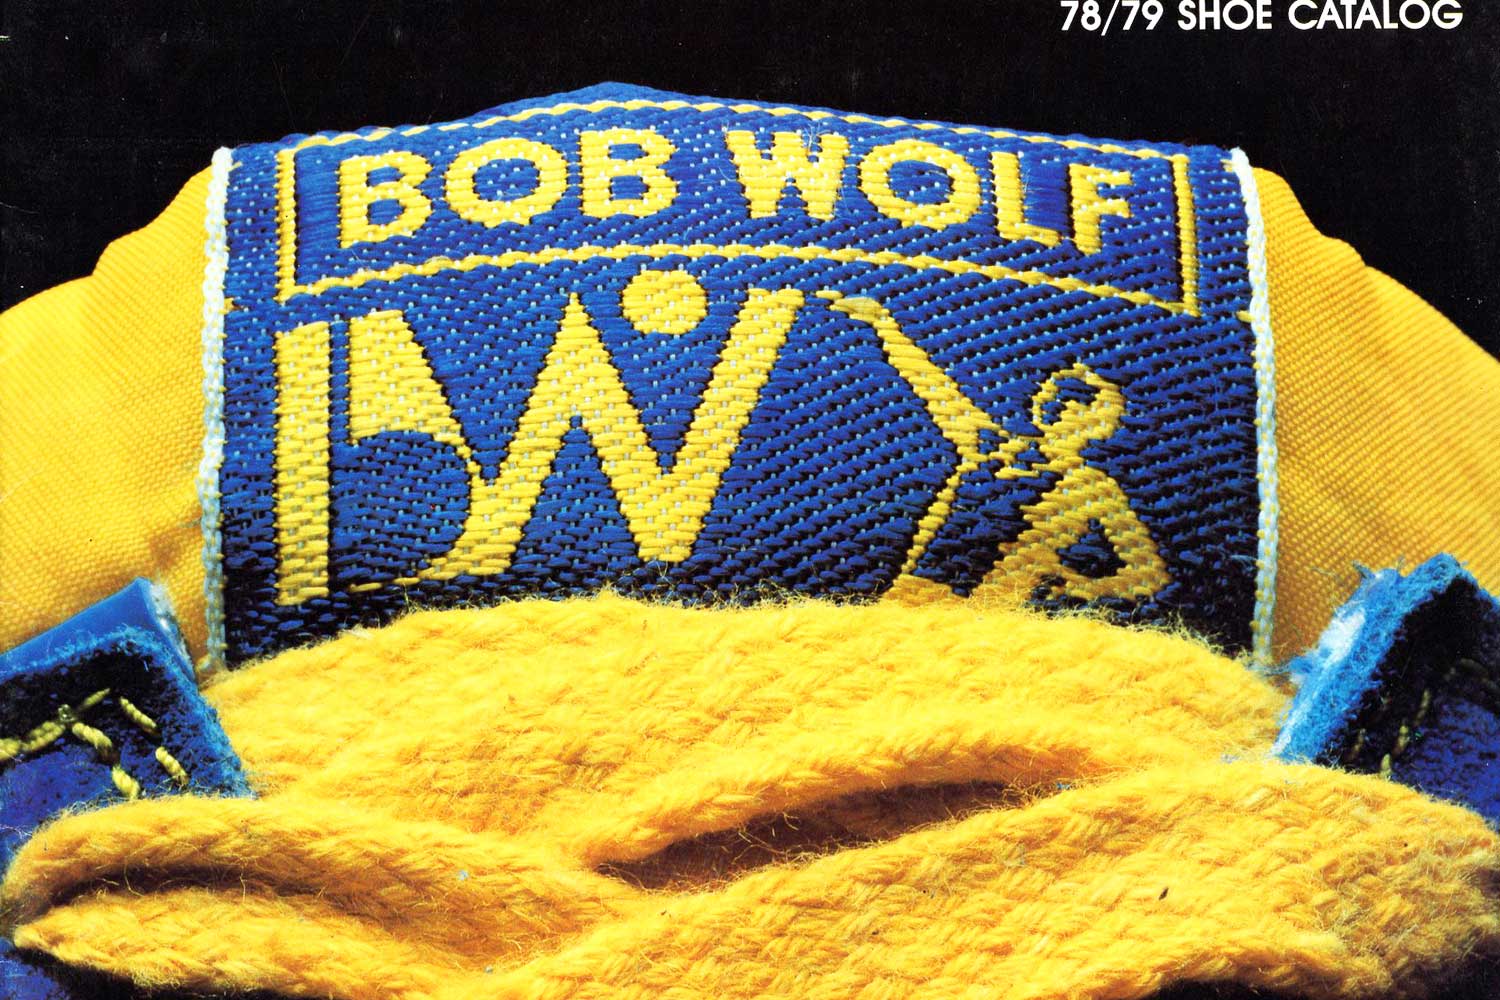 Bob Wolf 1978 - 1979 vintage sneaker catalog cover @ The Deffest